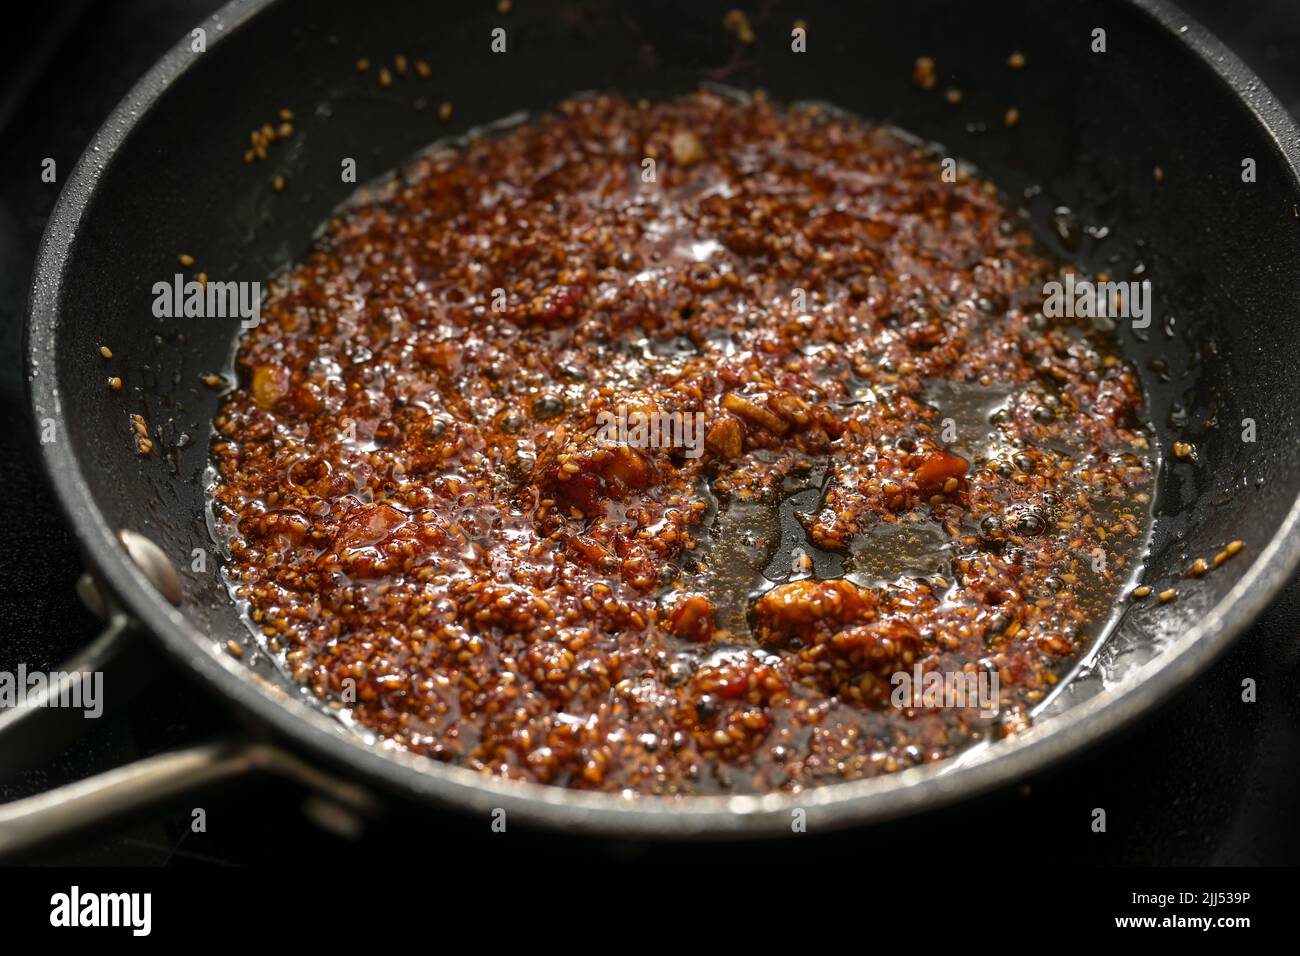 Cooking a spicy sauce with ginger, garlic, chili, tomato paste and sesame seeds in vegetable oil in a pan, selected focus, very narrow depth of field Stock Photo